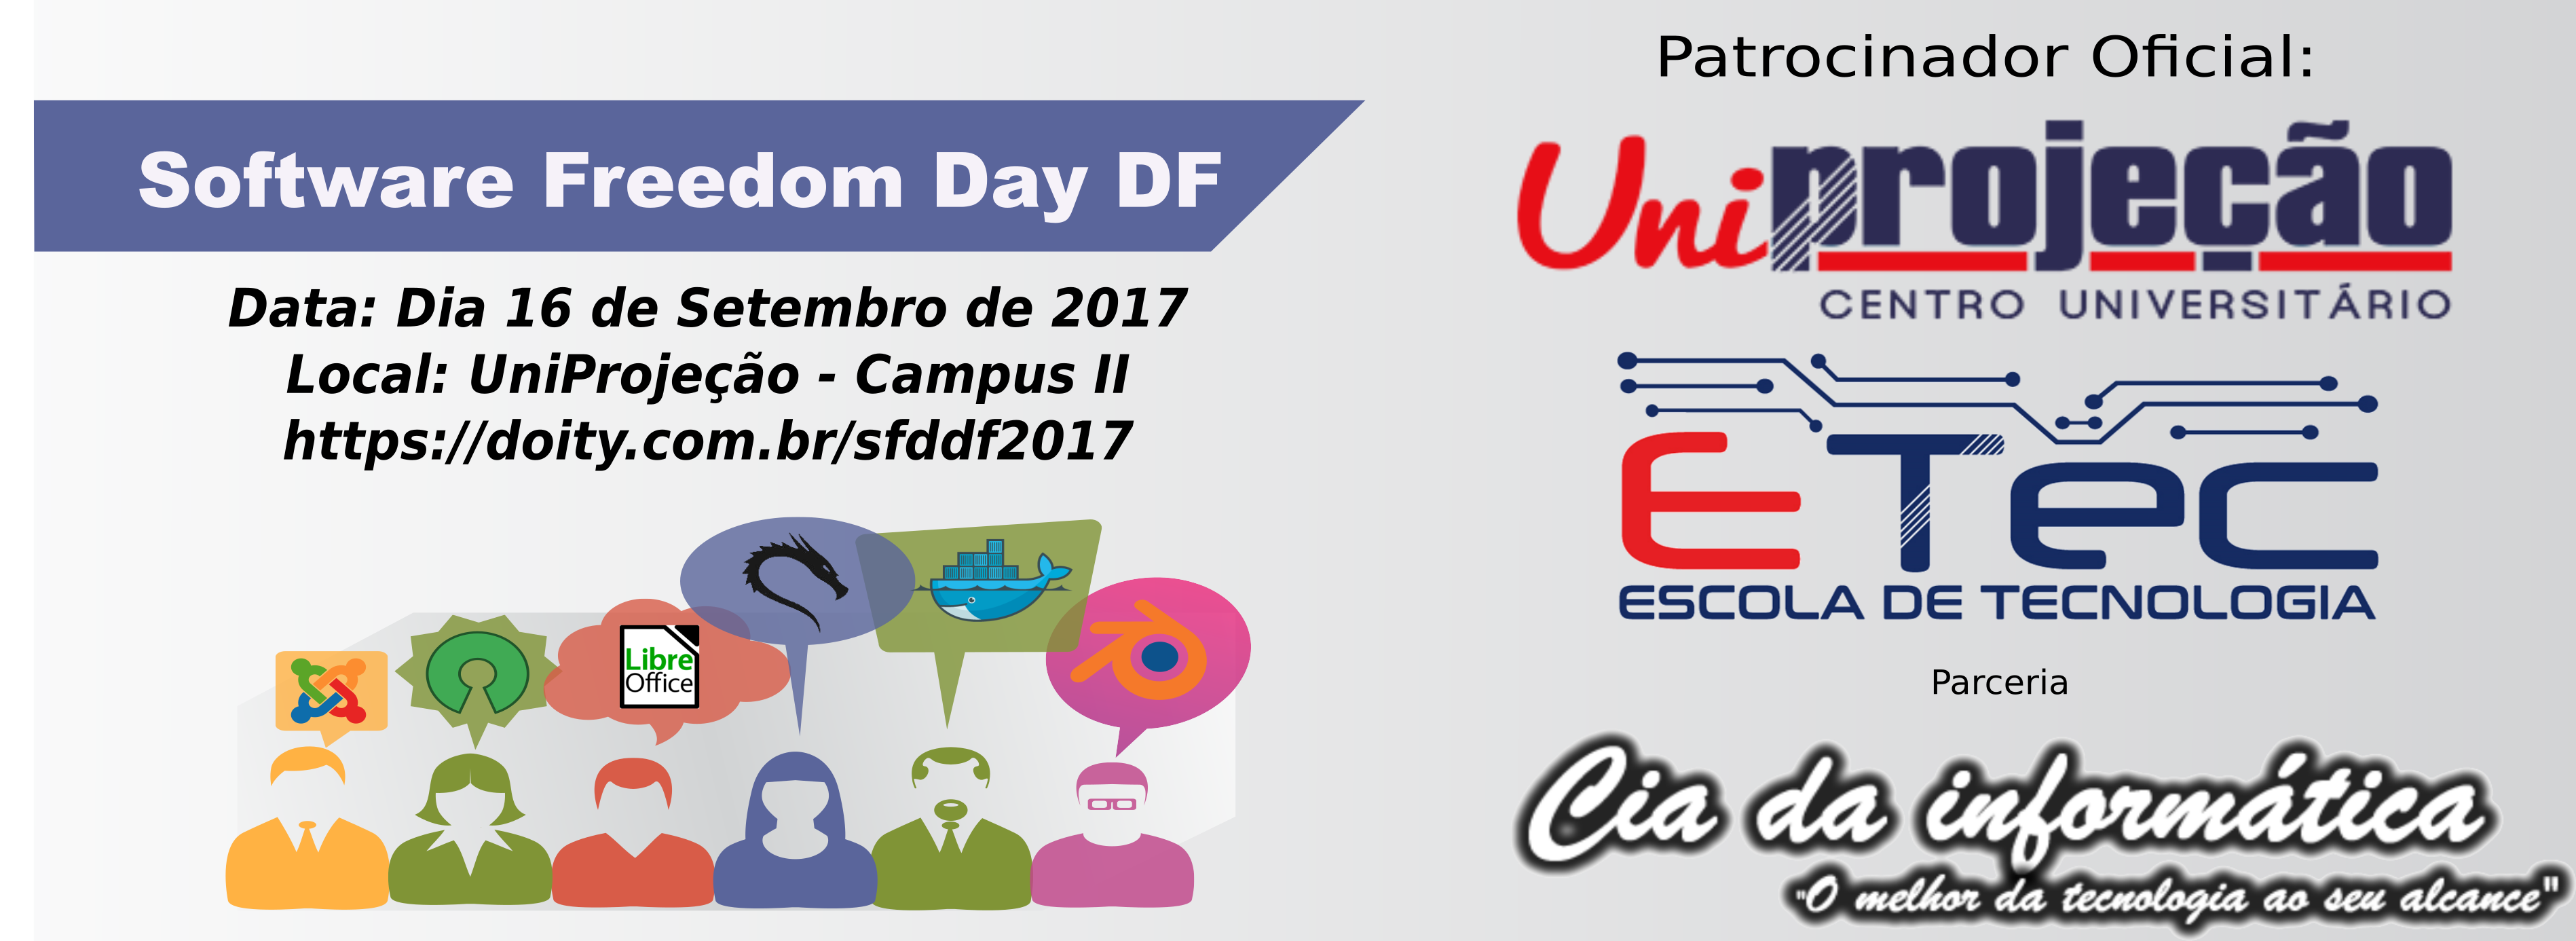 Software Freedom Day DF 2017